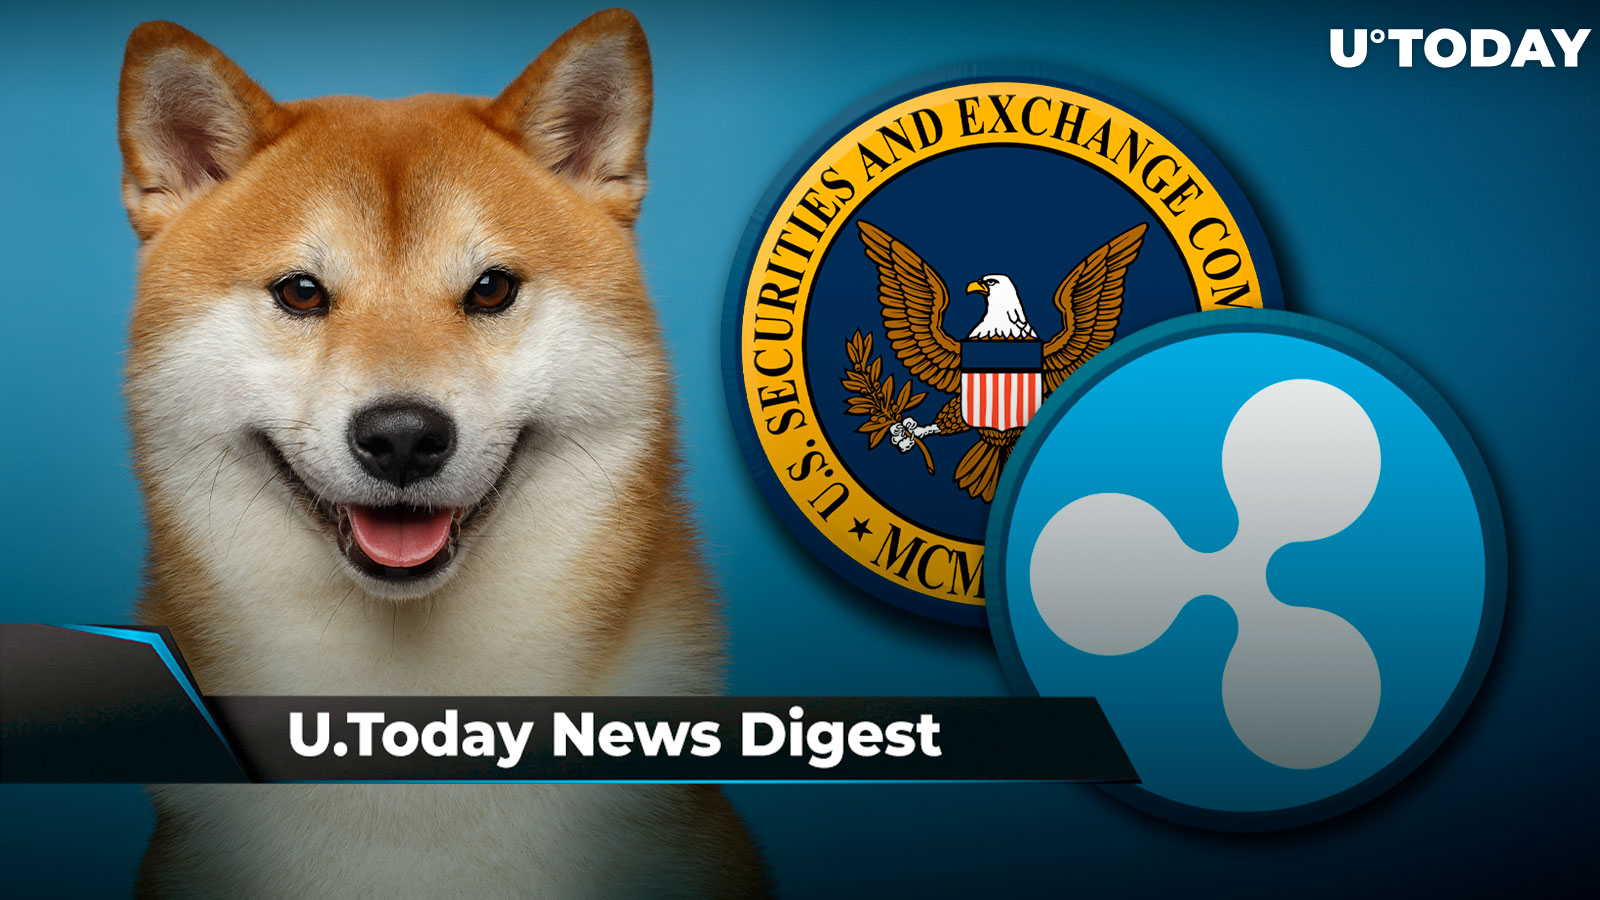 SHIB Social Performance Spikes, SEC Investigates Terra, RippleNet’s General Manager Resigns: Crypto News Digest by U.Today